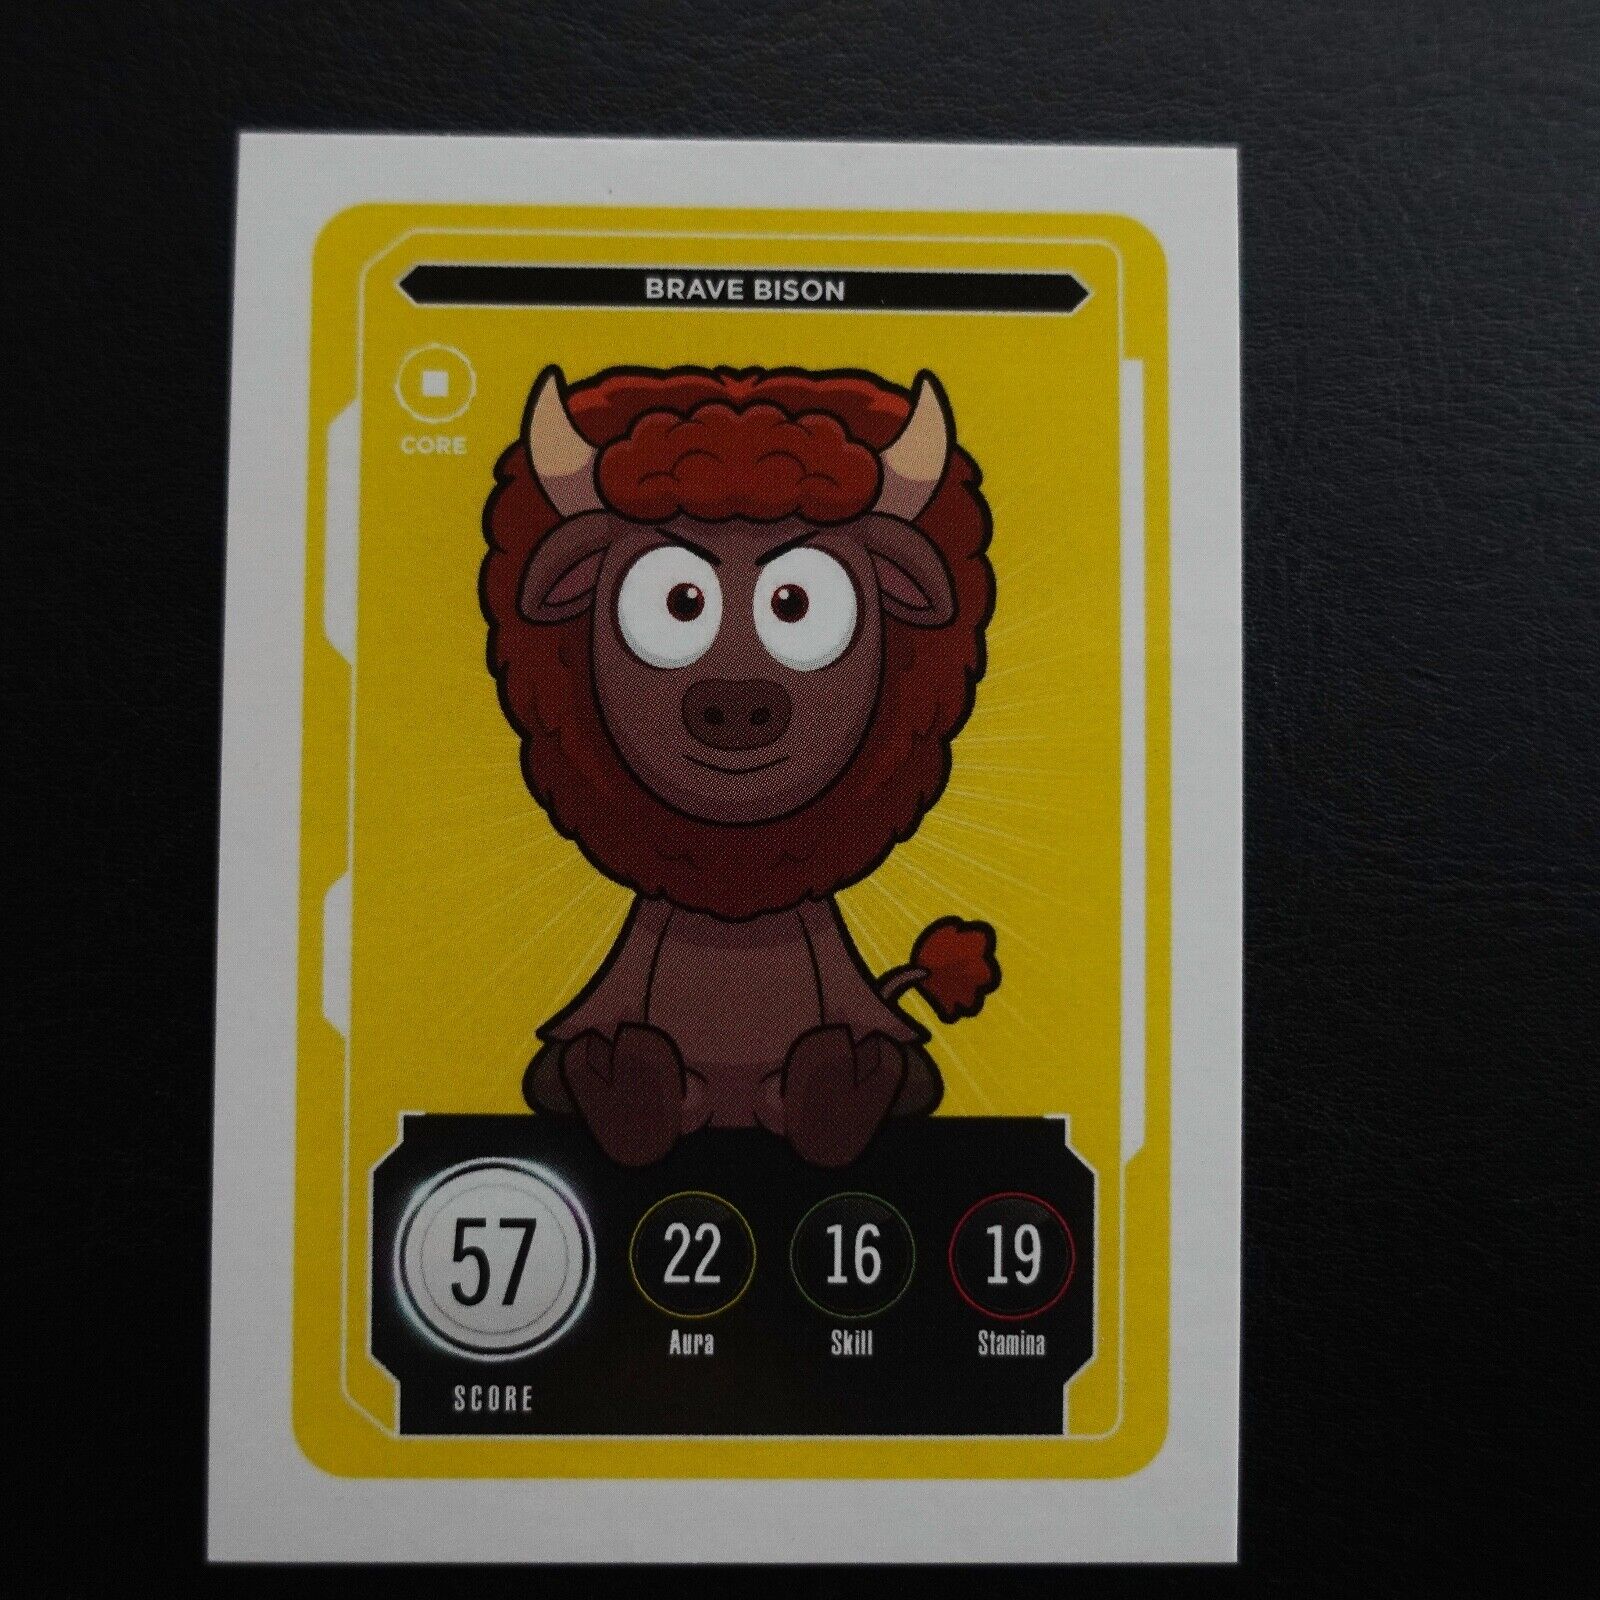 Brave Bison Veefriends Compete And Collect Series 2 Trading Card Gary